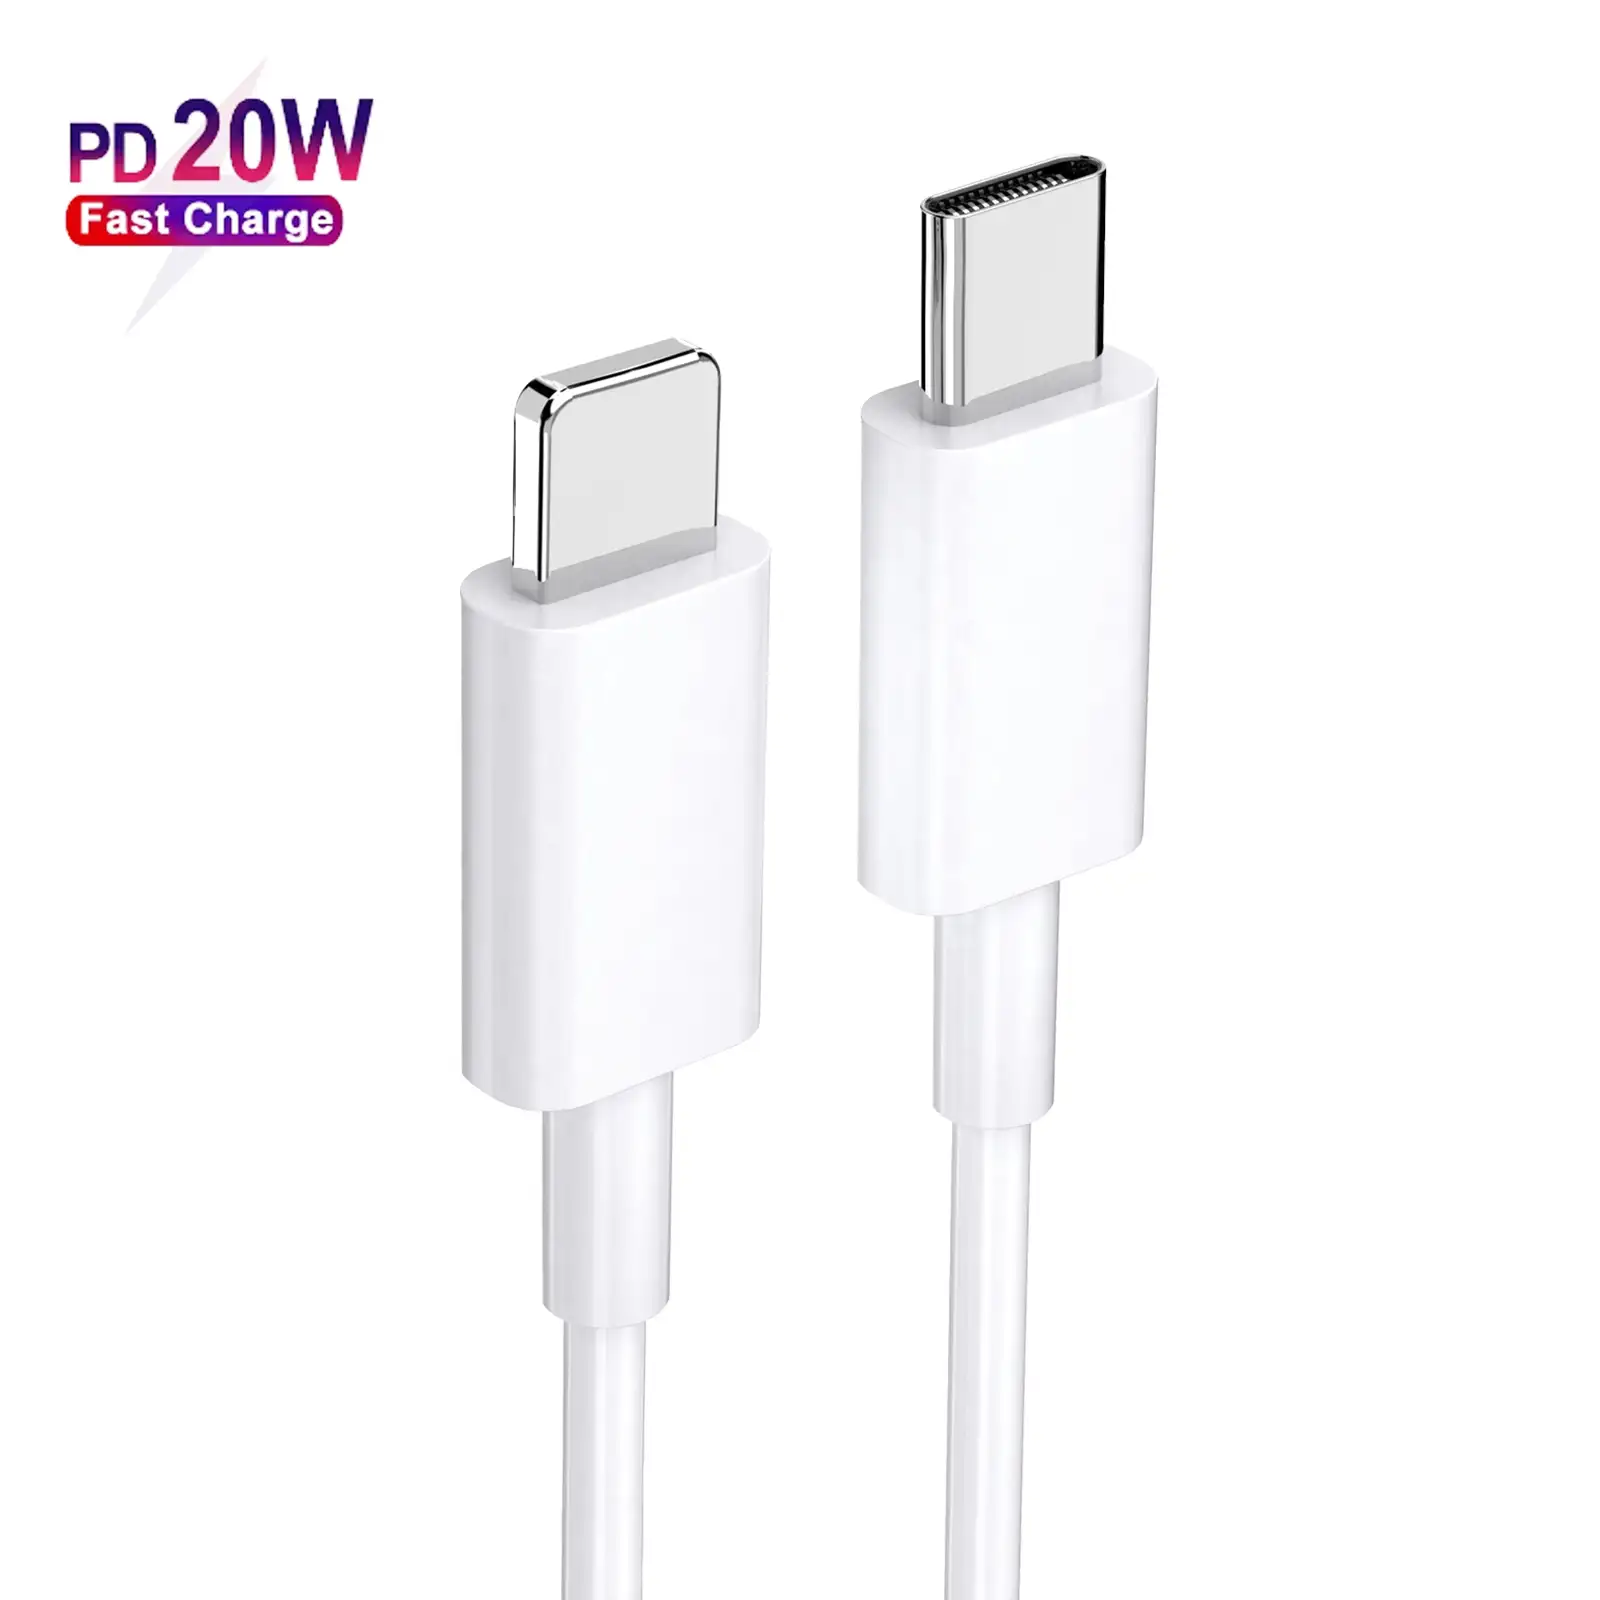 2 for iphone13 charger cable usb c type-c to pd 20w fast charging data cable for android for iphone 11 12 13 pro max